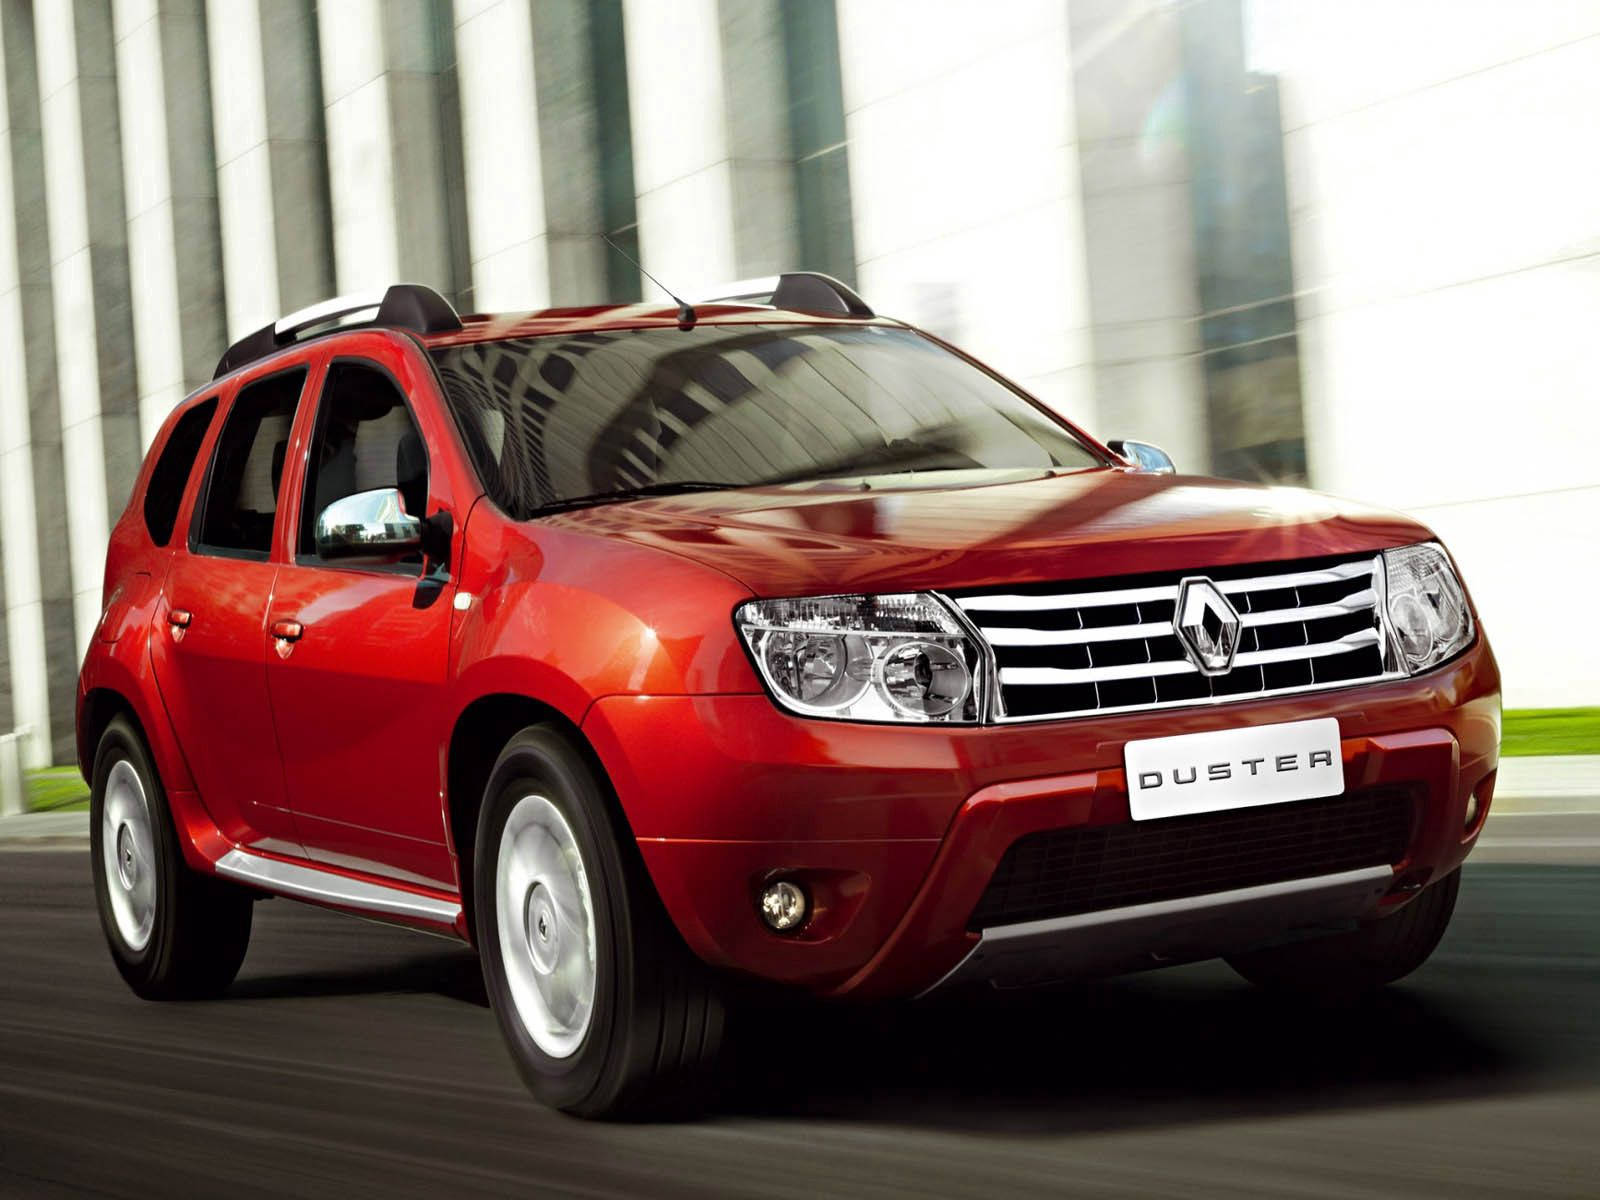 Renault Duster On Road Background